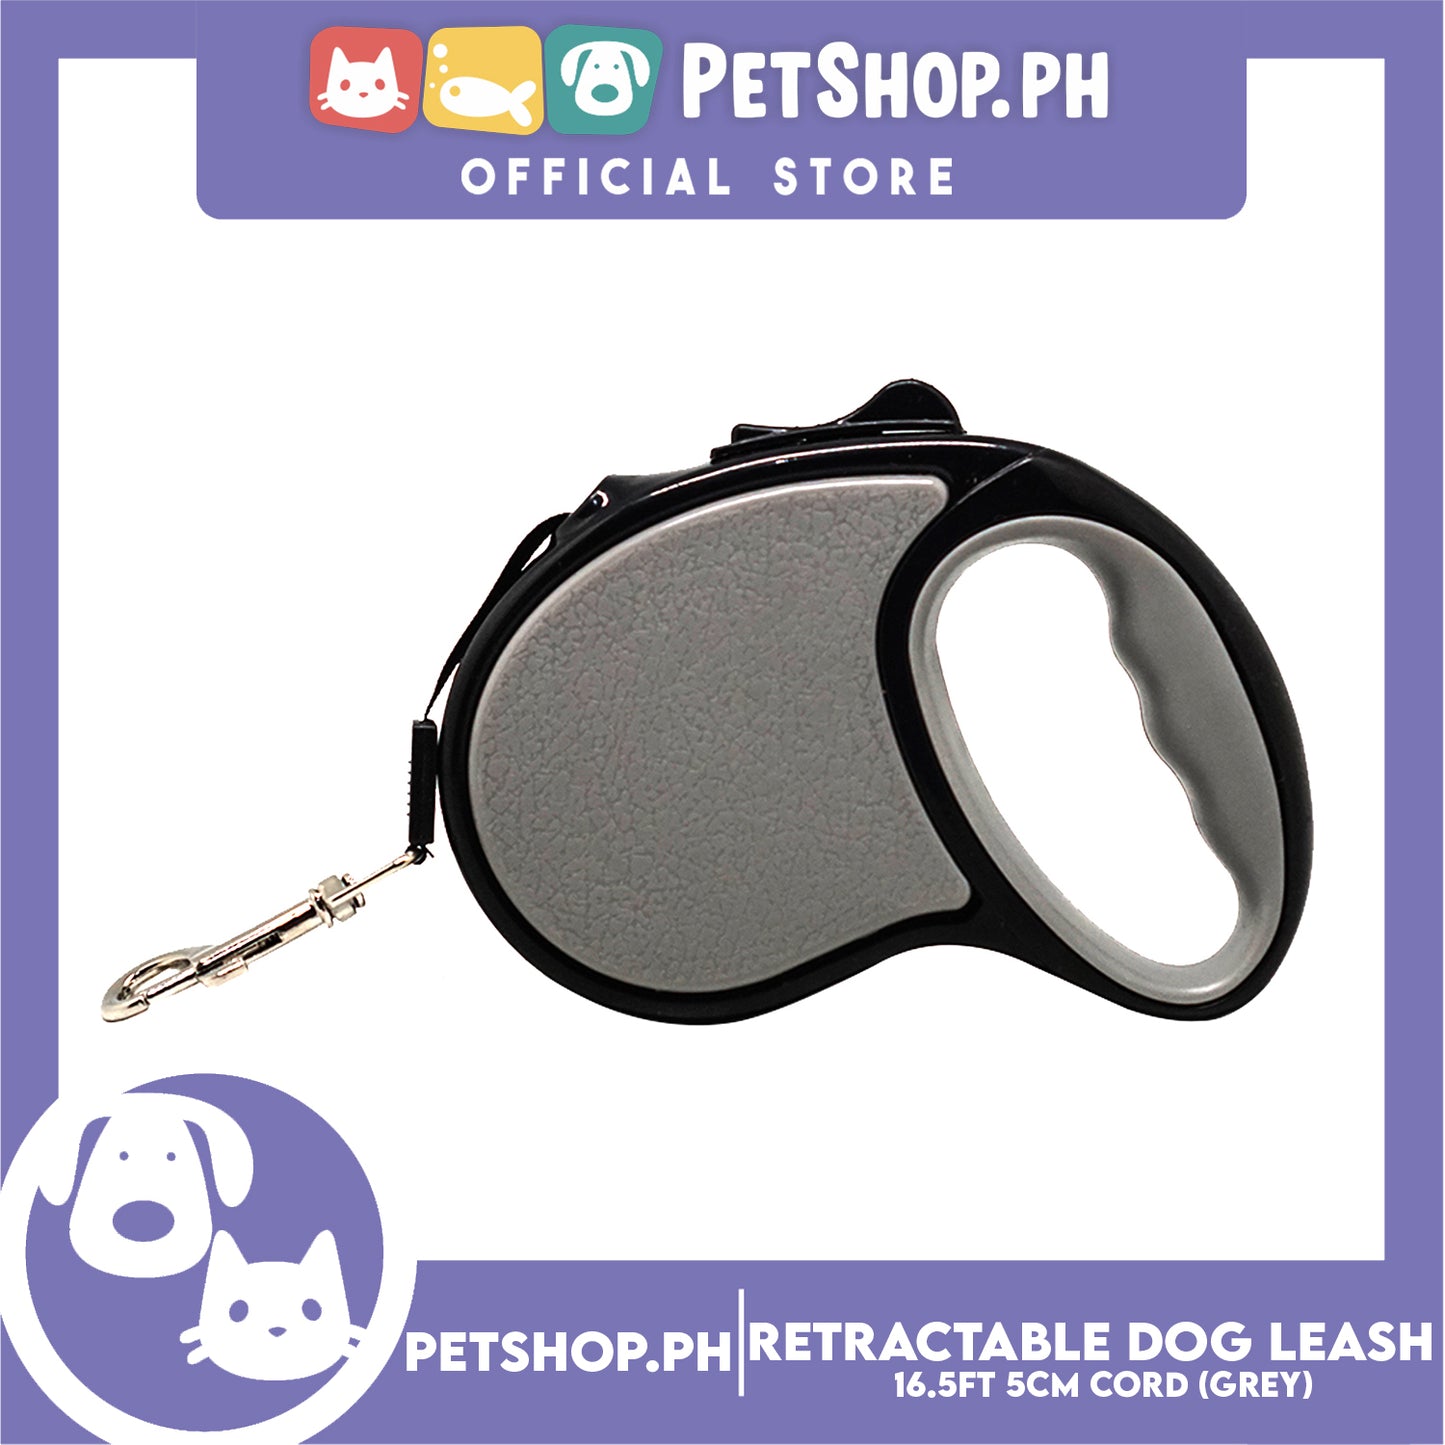 Retractable Dog Leash 16.5ft (5M) Cord with One Button Lock and Release for Up to 33lbs. Dog & Cats (Grey)